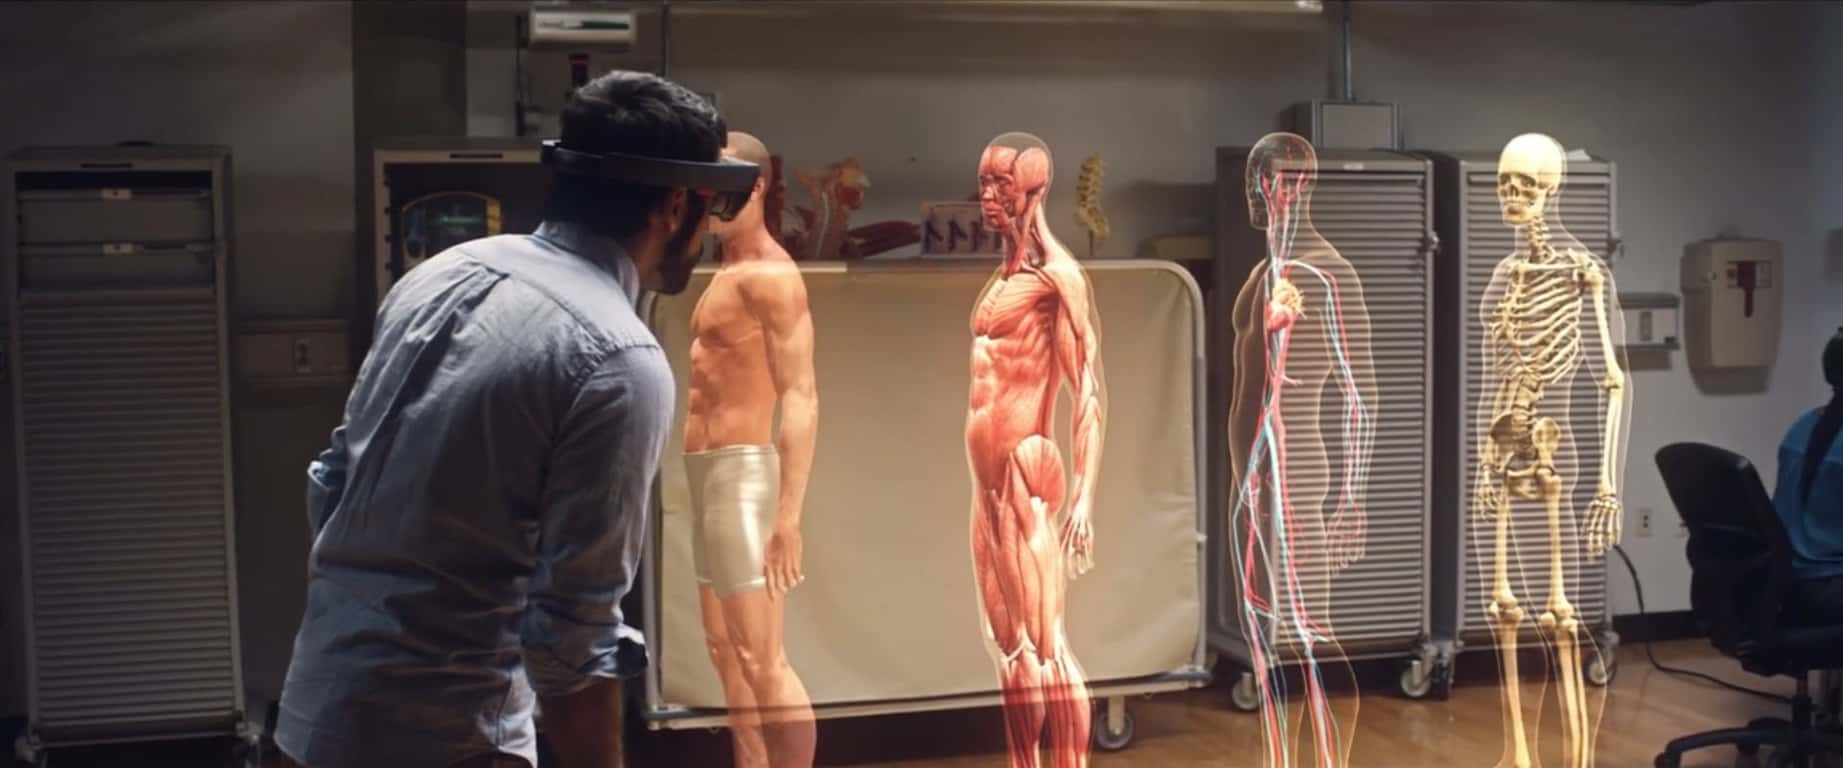 HoloLens Exagerated Field of View